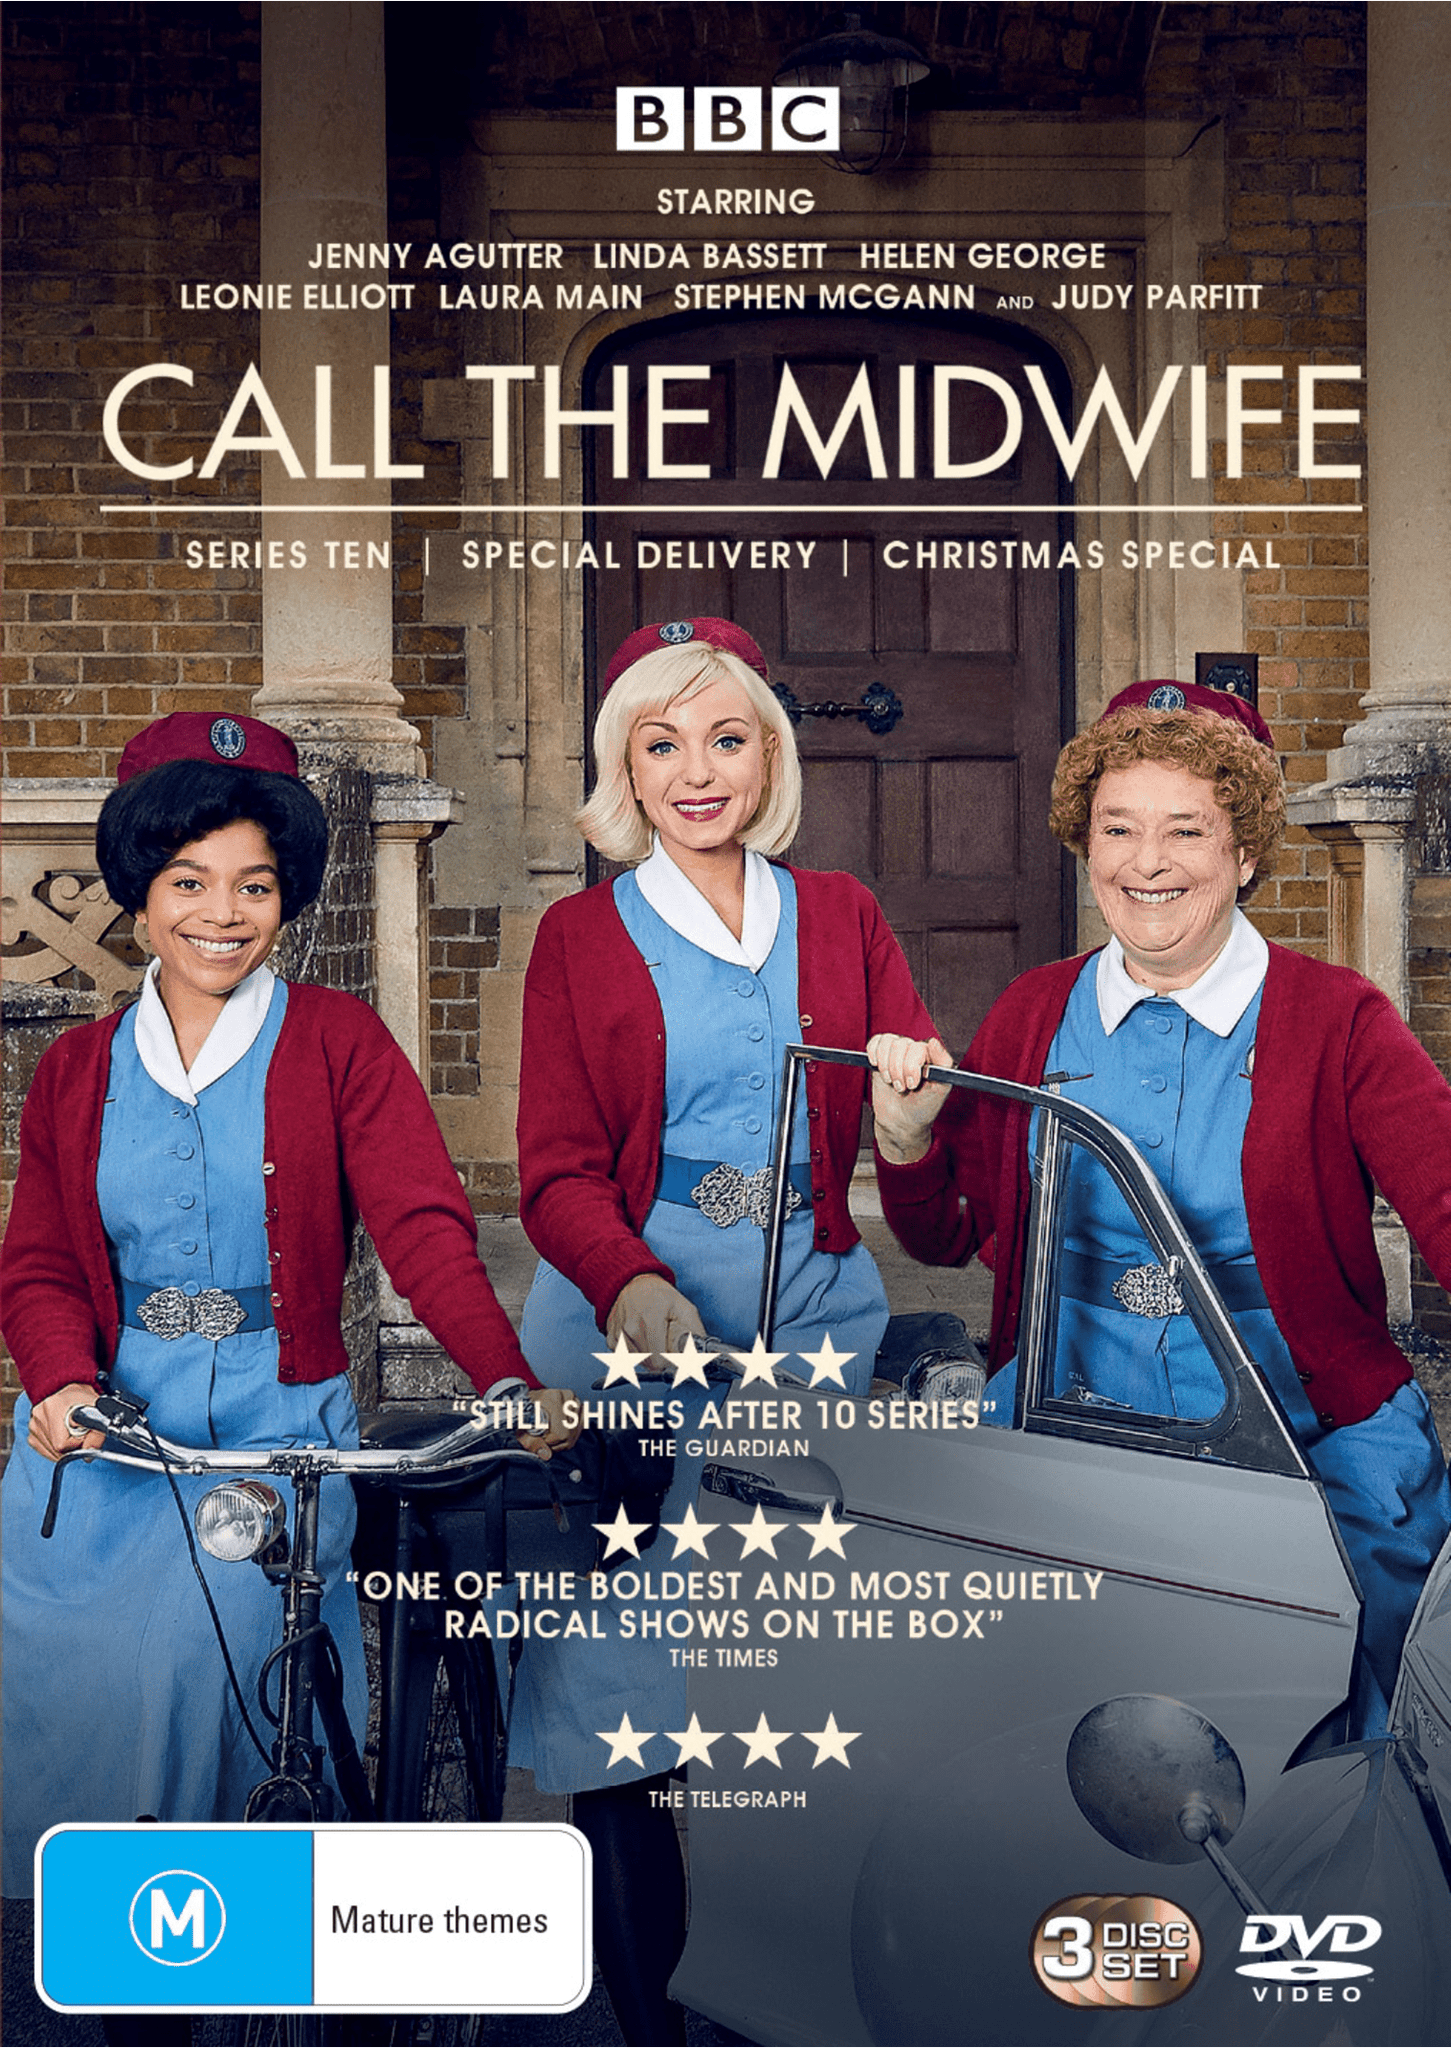 CALL THE MIDWIFE SERIES 10